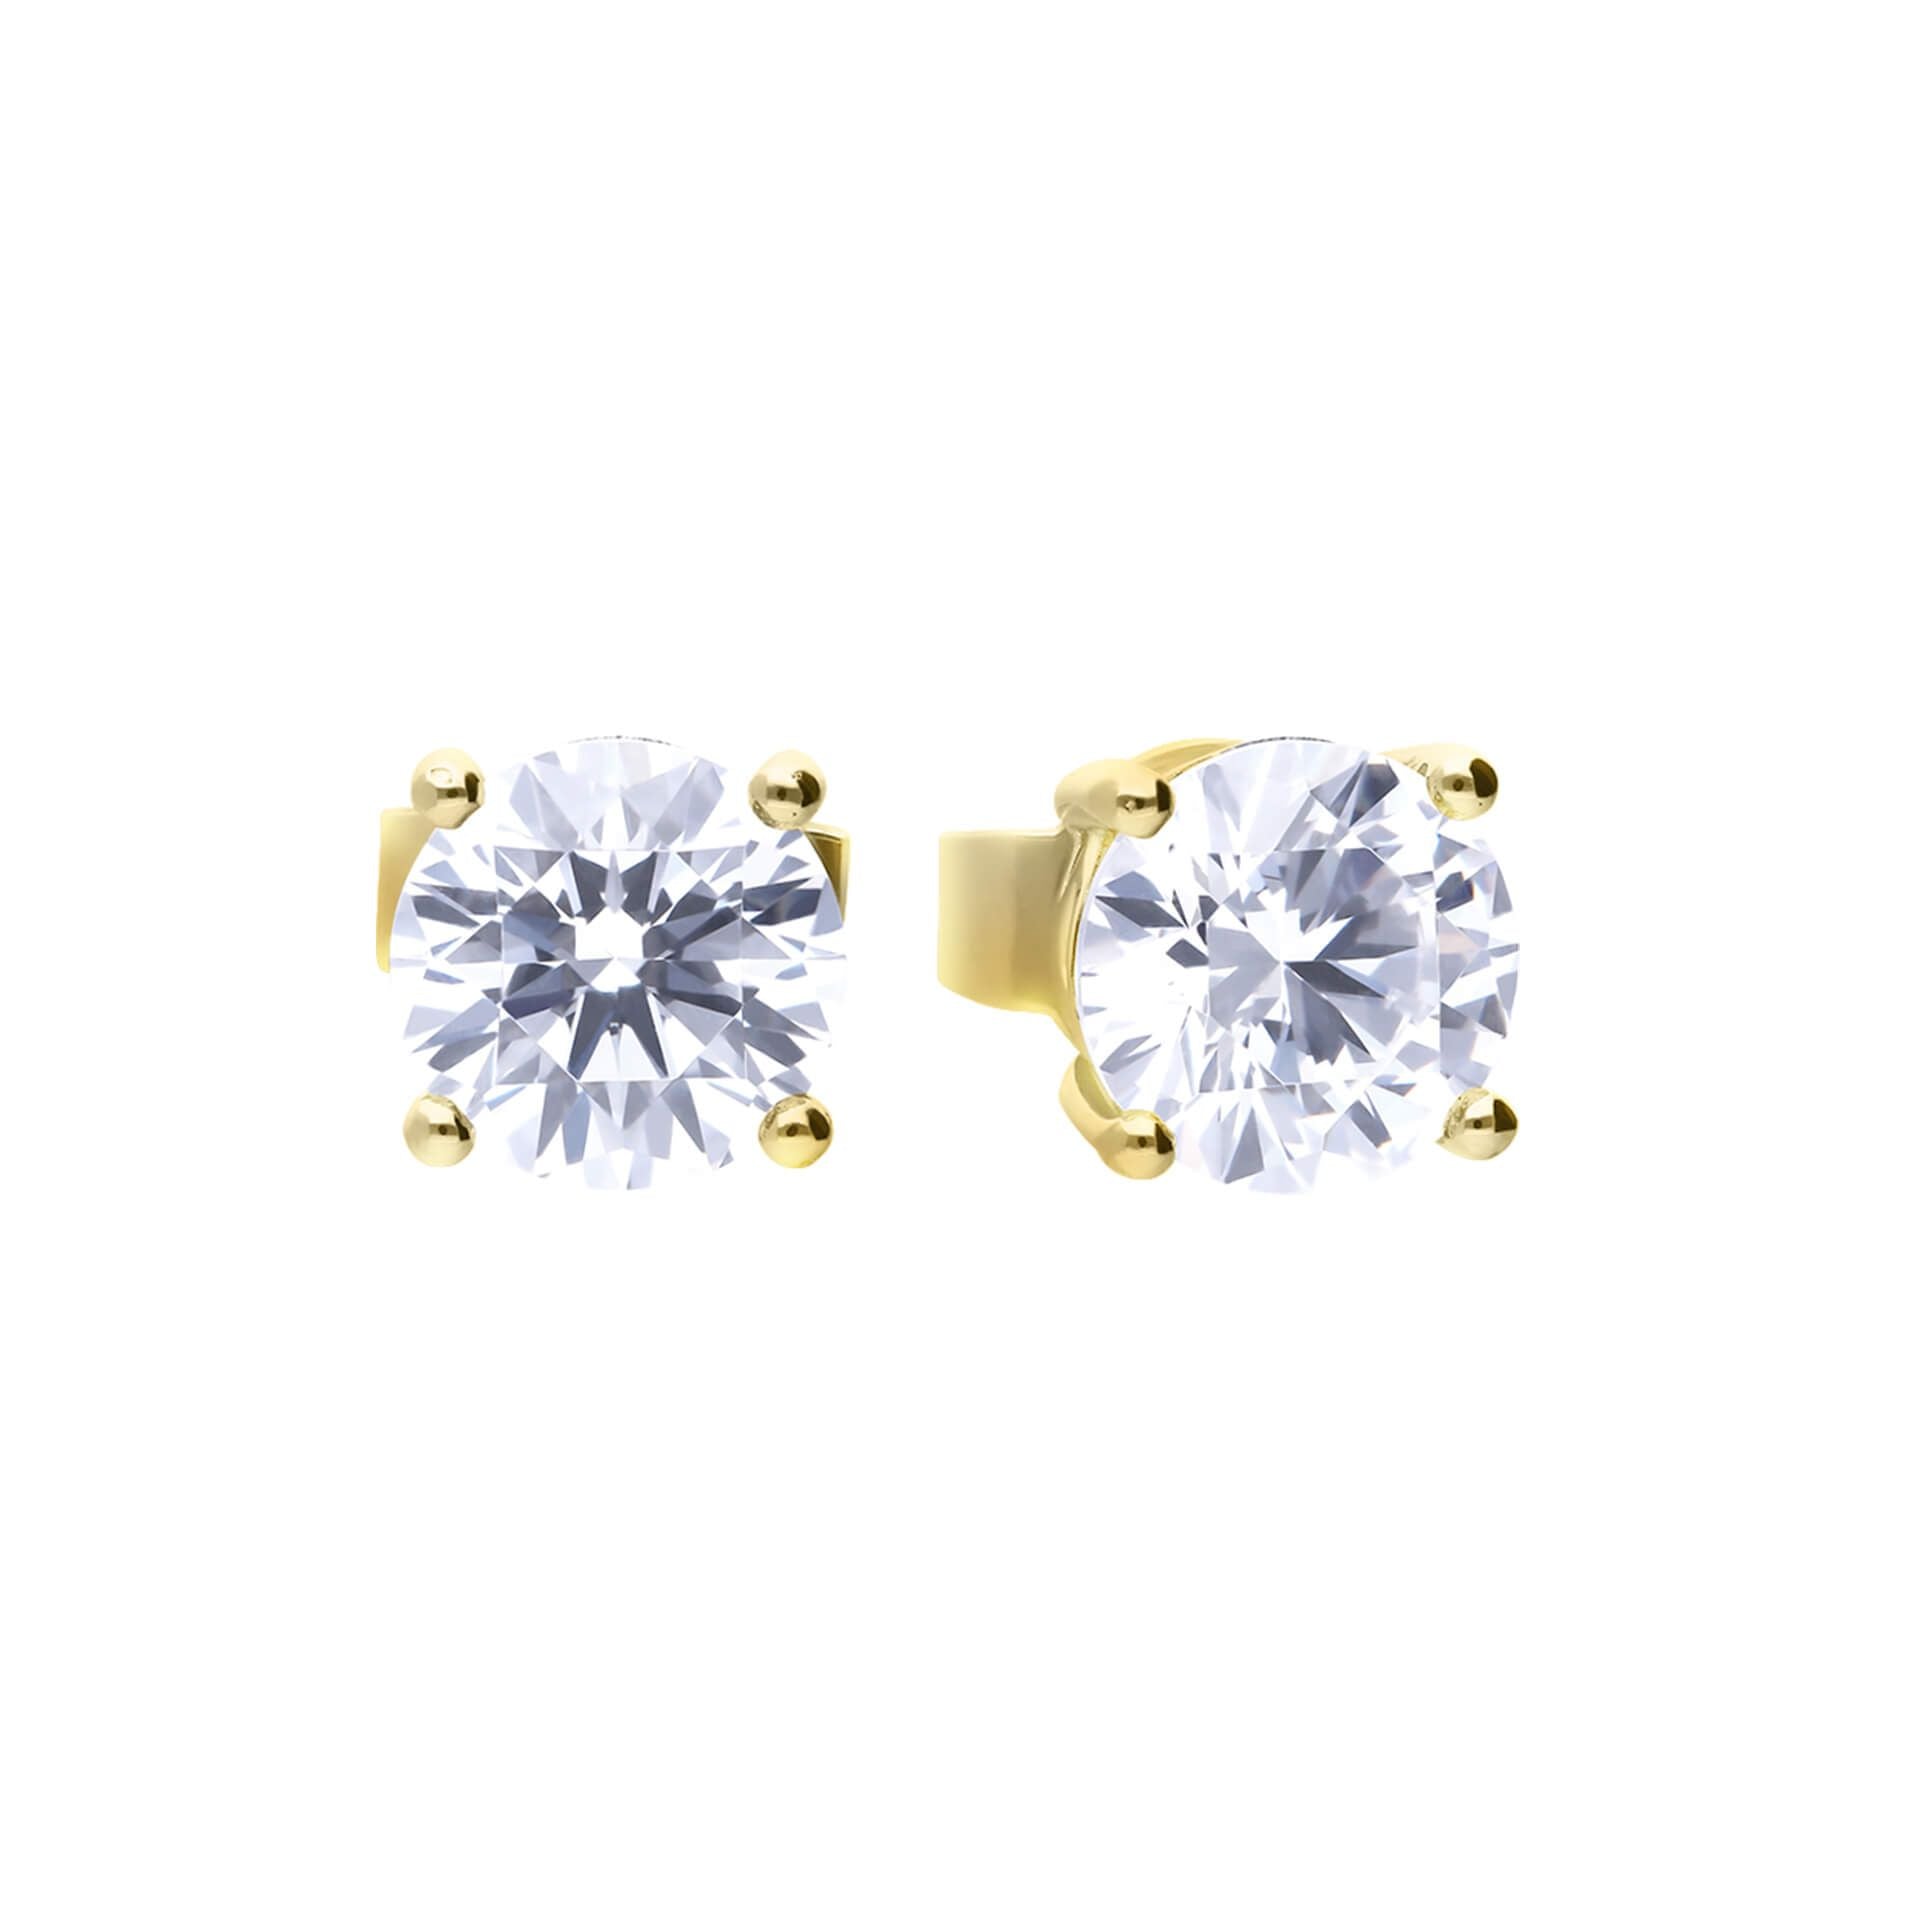 Gold Plated Silver and Zircona Four Claw 1 Carat Stud Earrings — 1CT